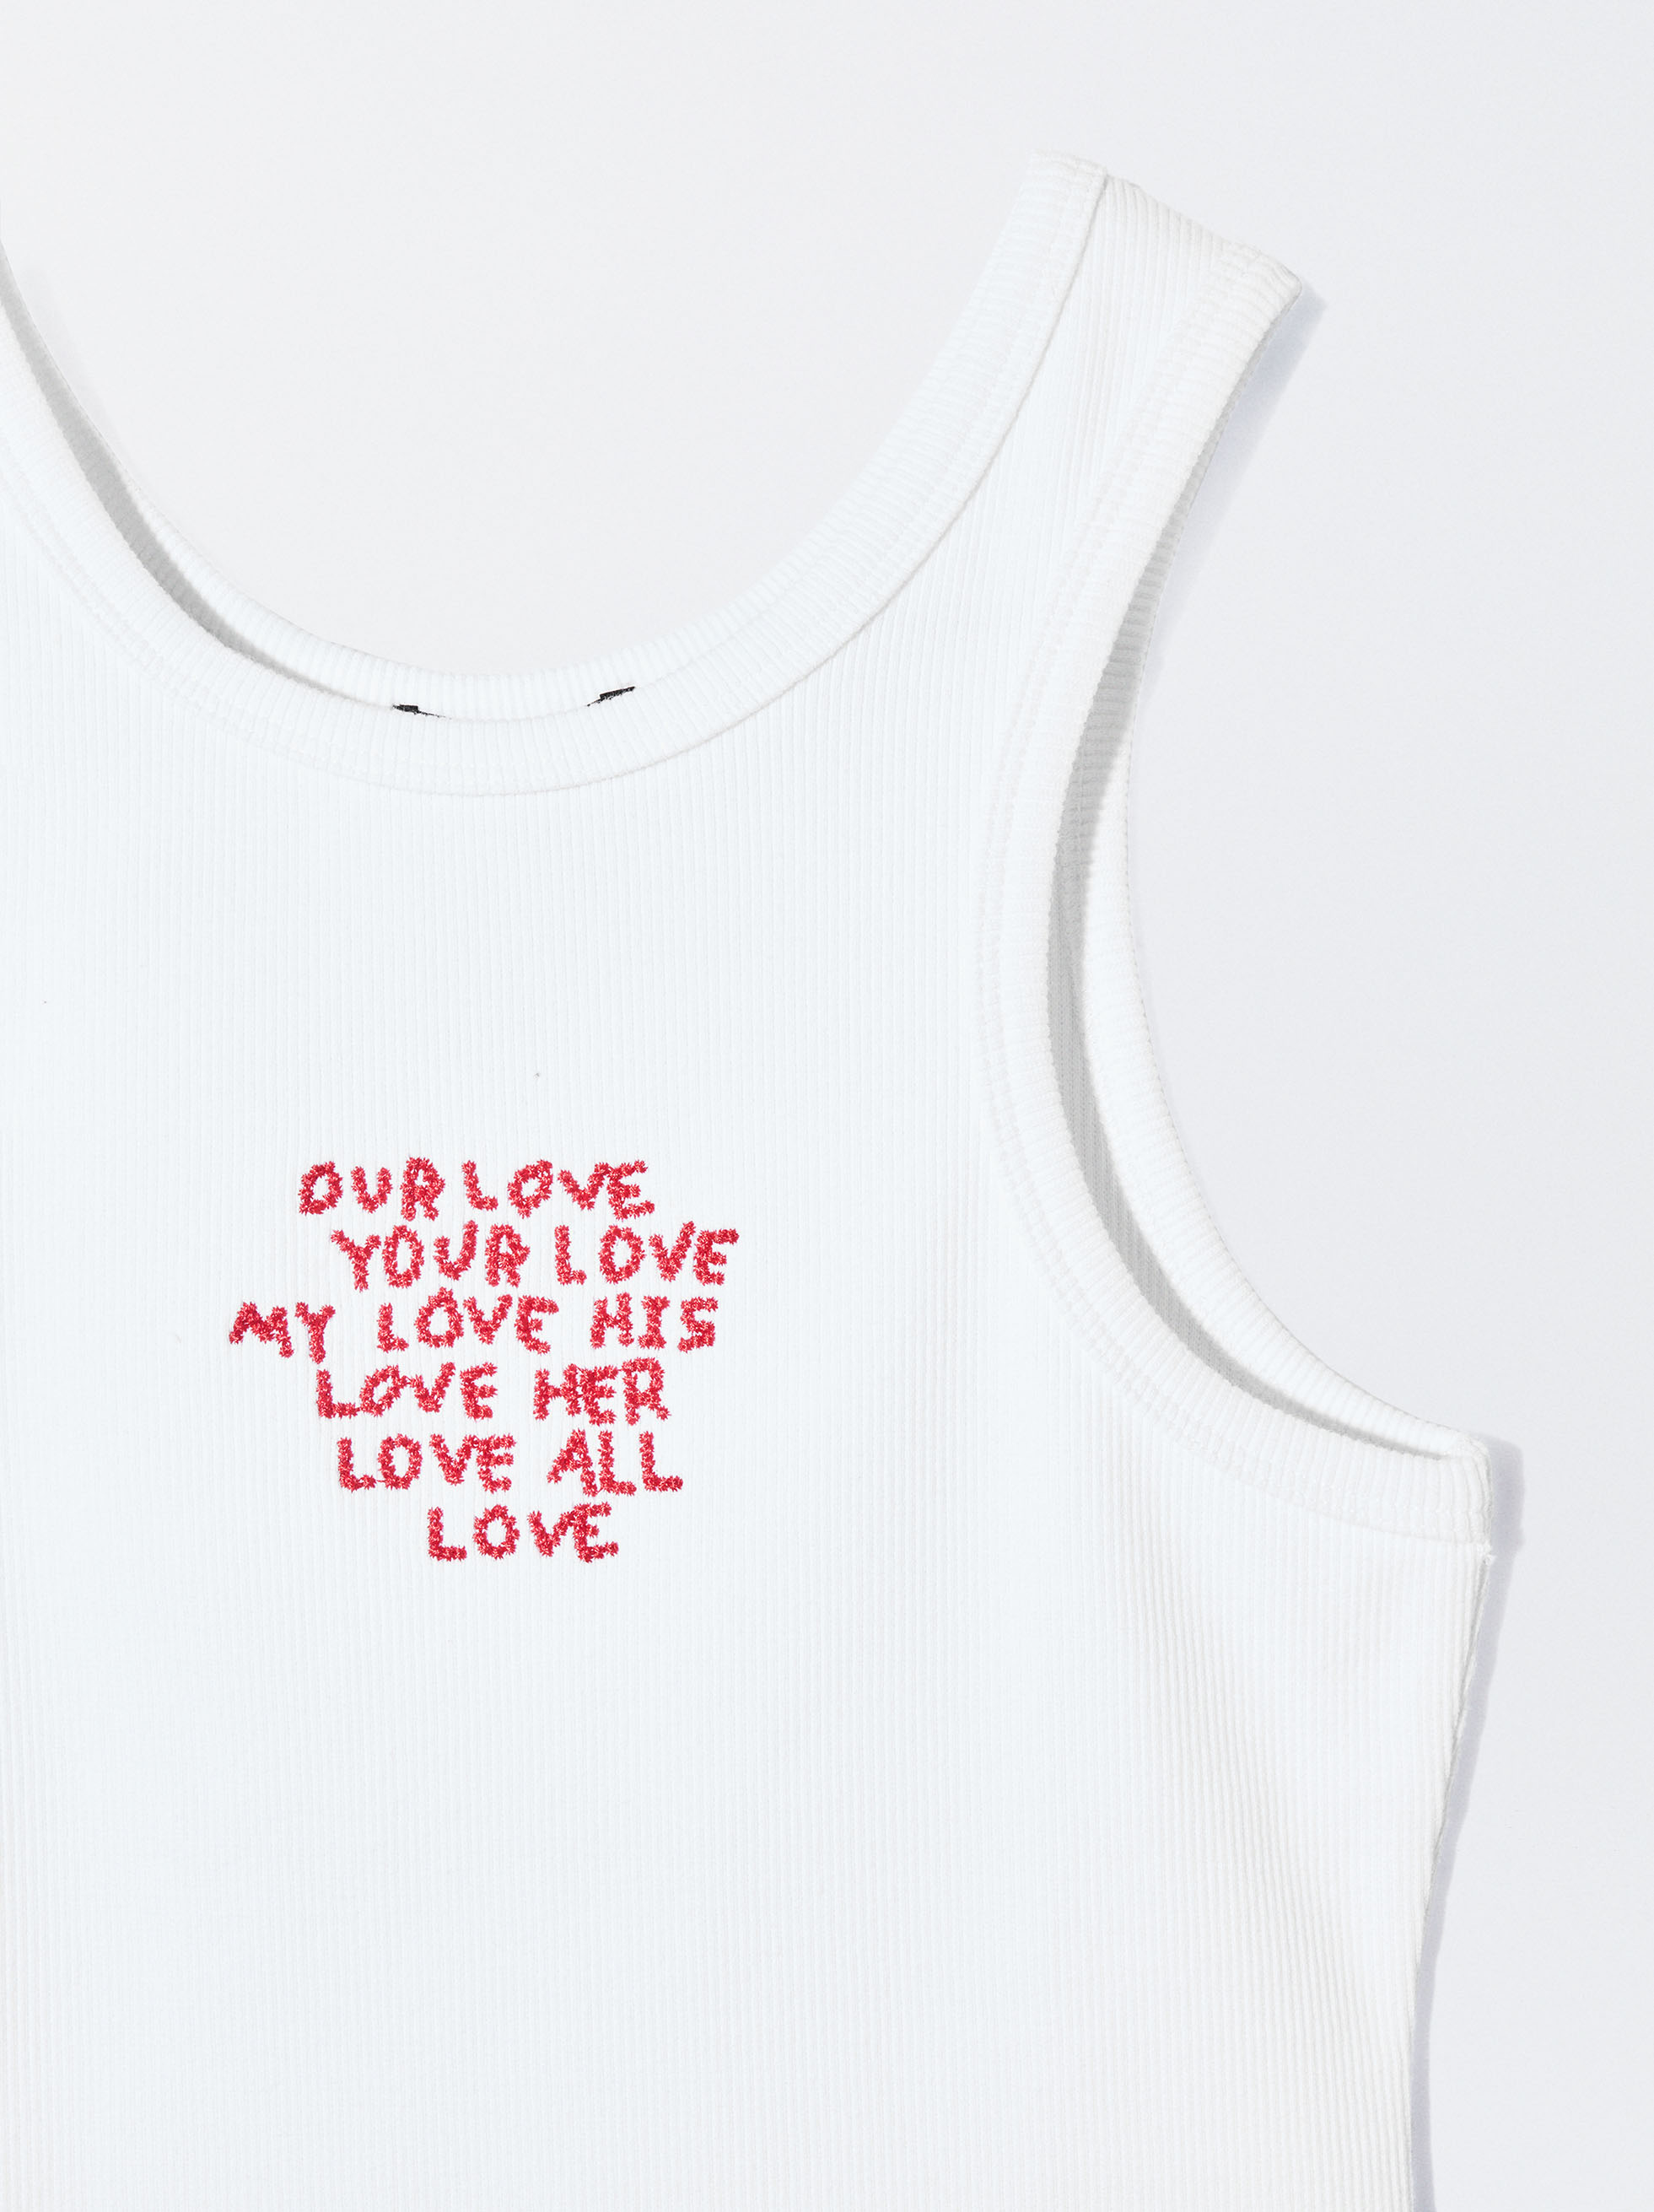 Exclusivo Online - Top Curto Love image number 6.0